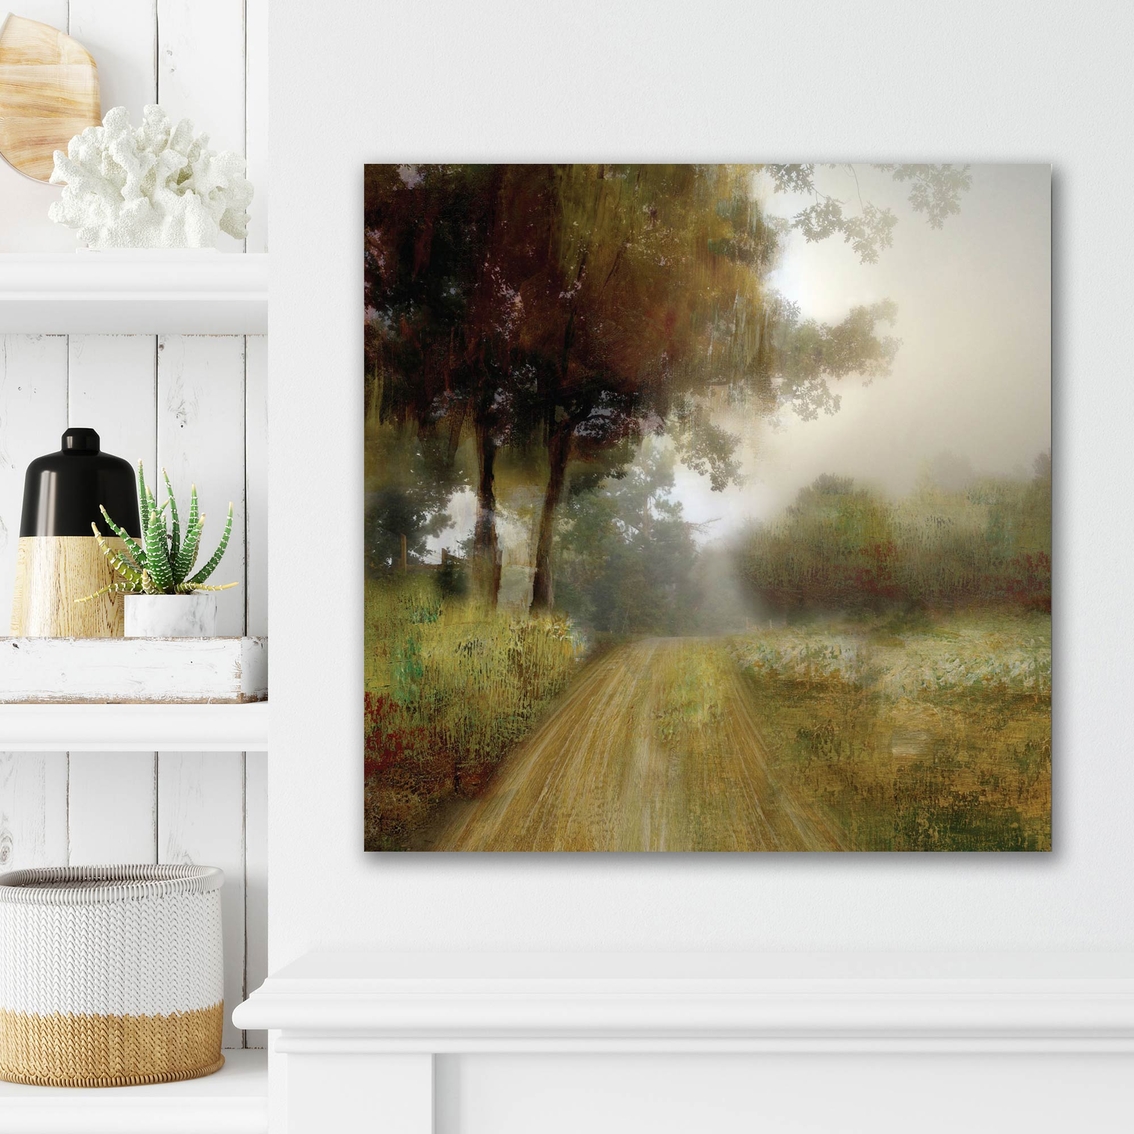 Courtside Market Country Road Canvas Wall Art - Image 5 of 7